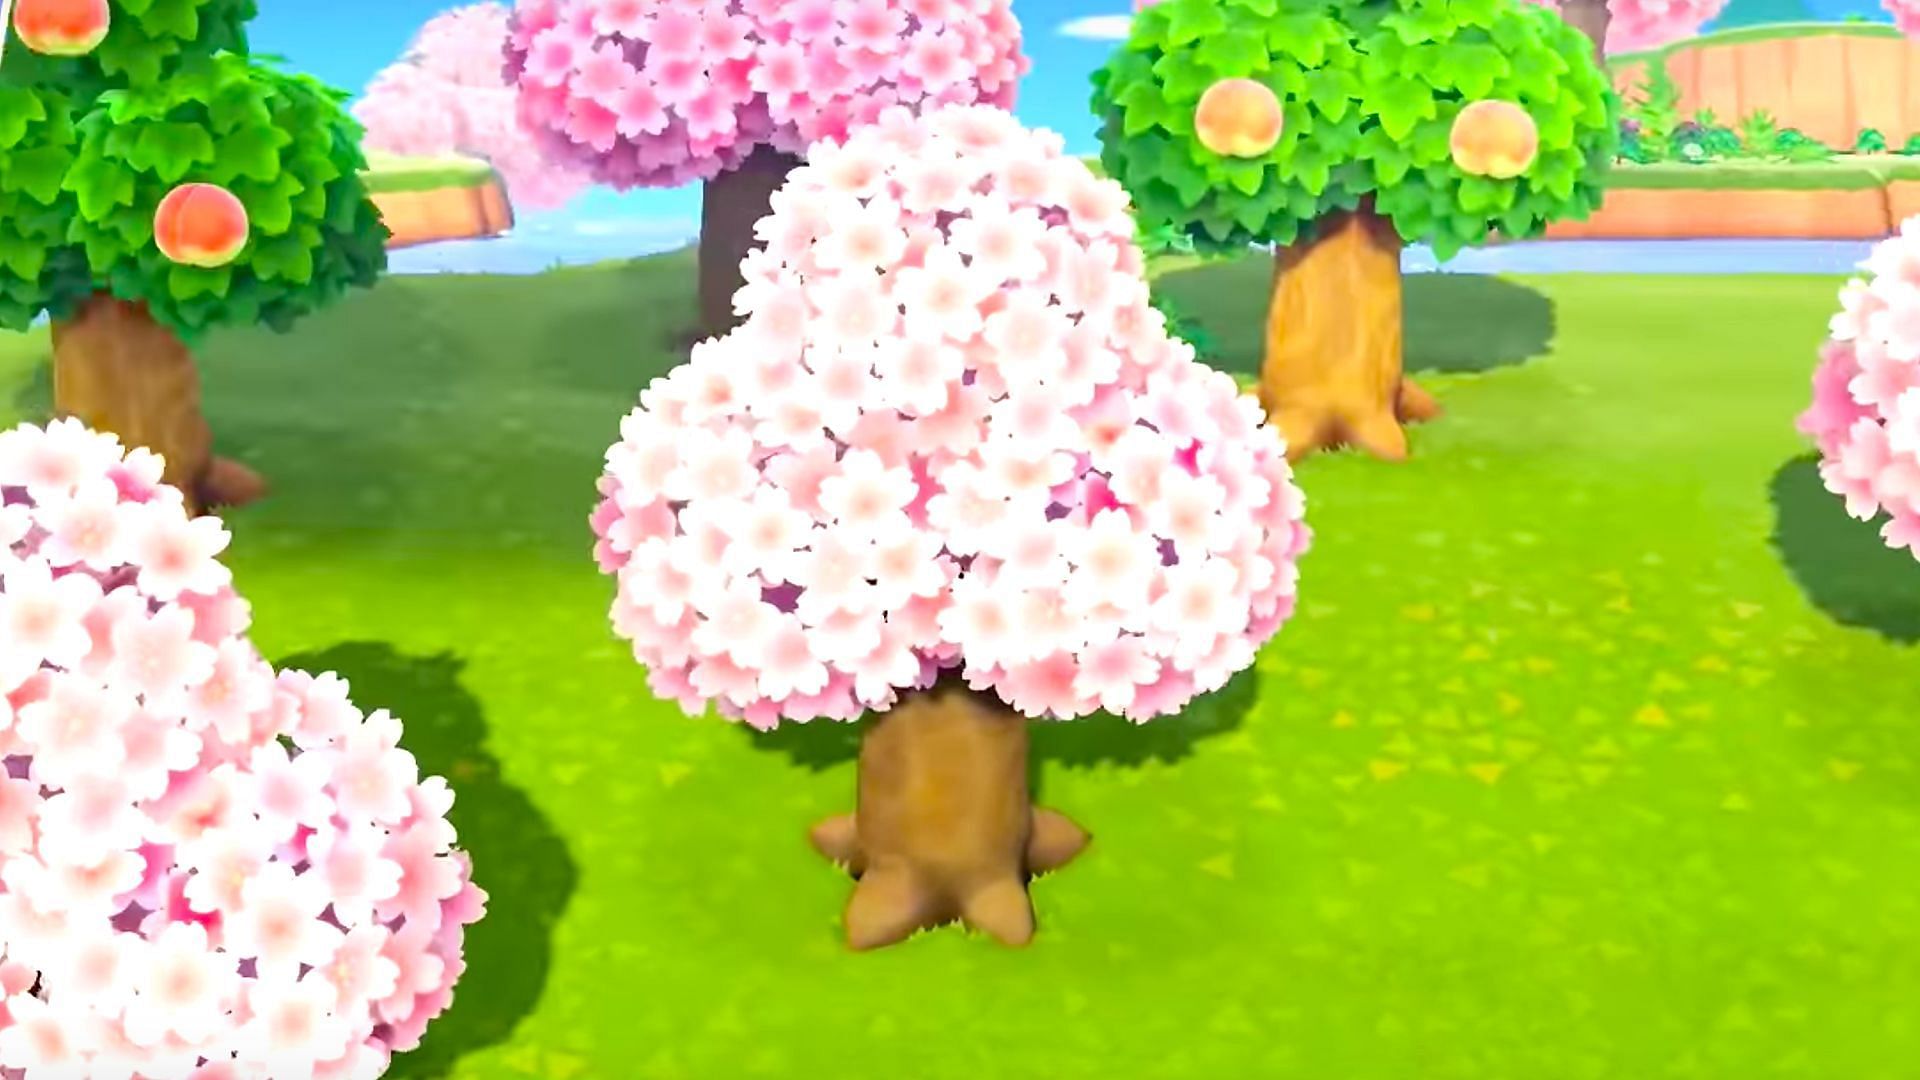 Cherry blossom season in Animal Crossing New Horizons Dates, features